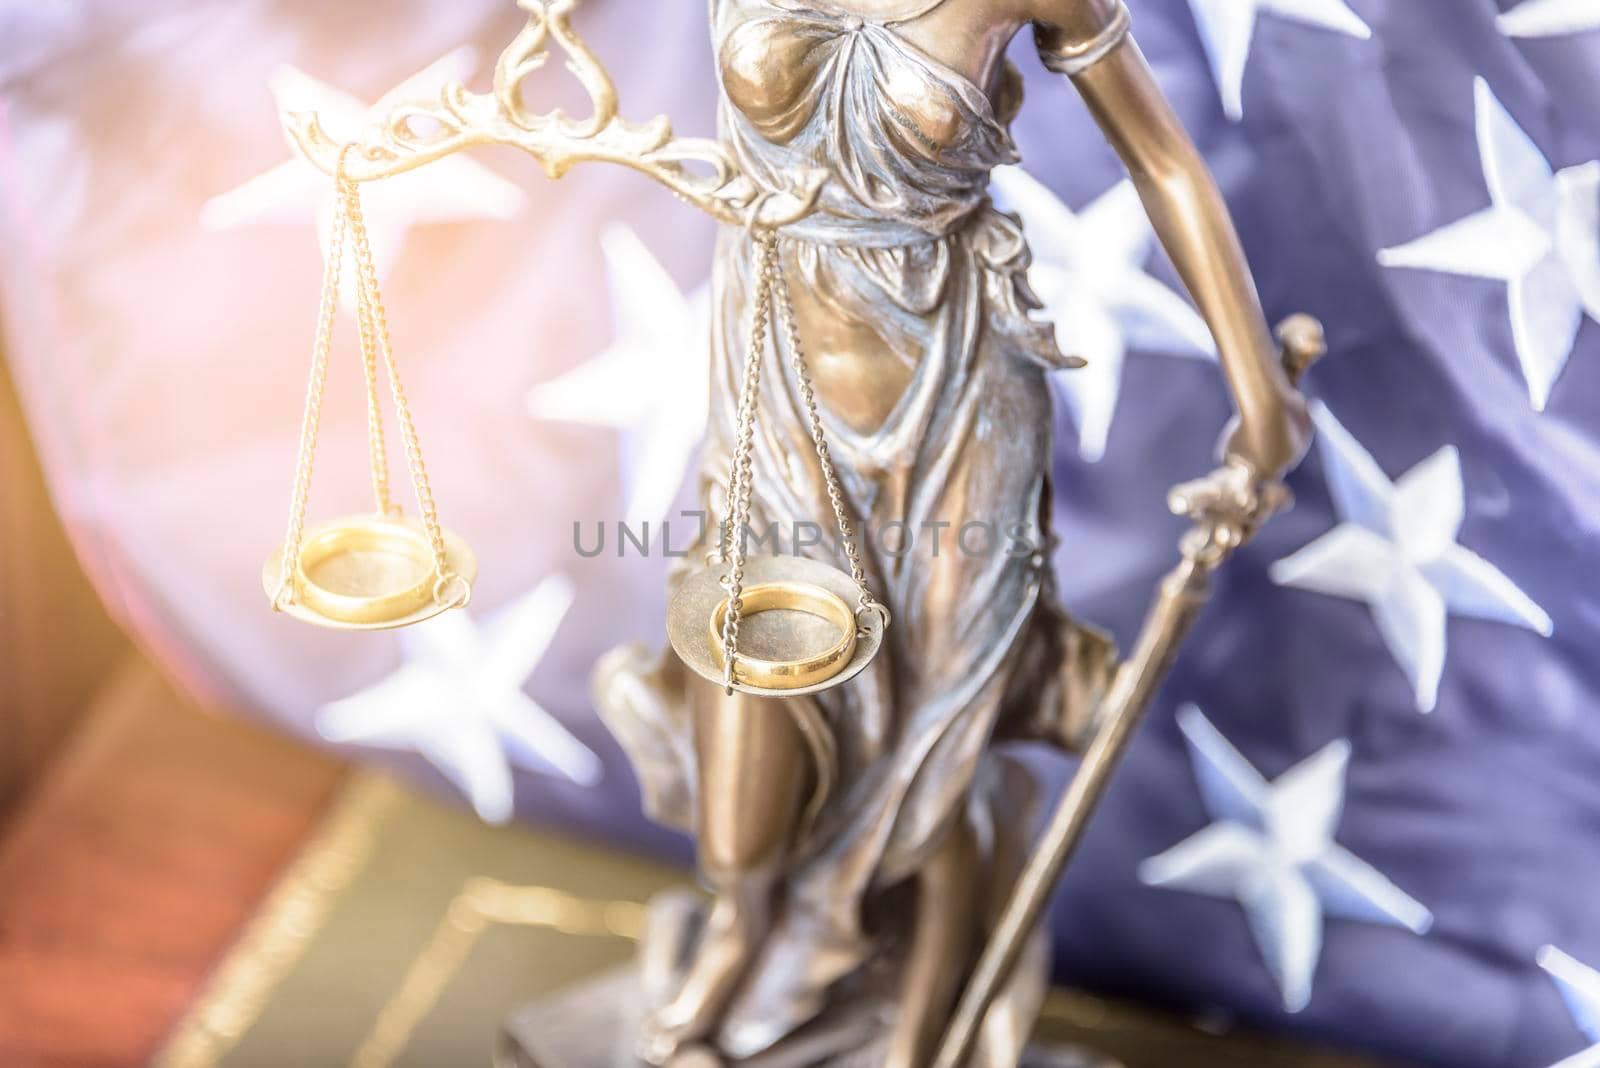 The statue of justice Themis or Iustitia, the goddess of justice blindfolded against a flag of the United States of America, as a legal concept. by jbruiz78